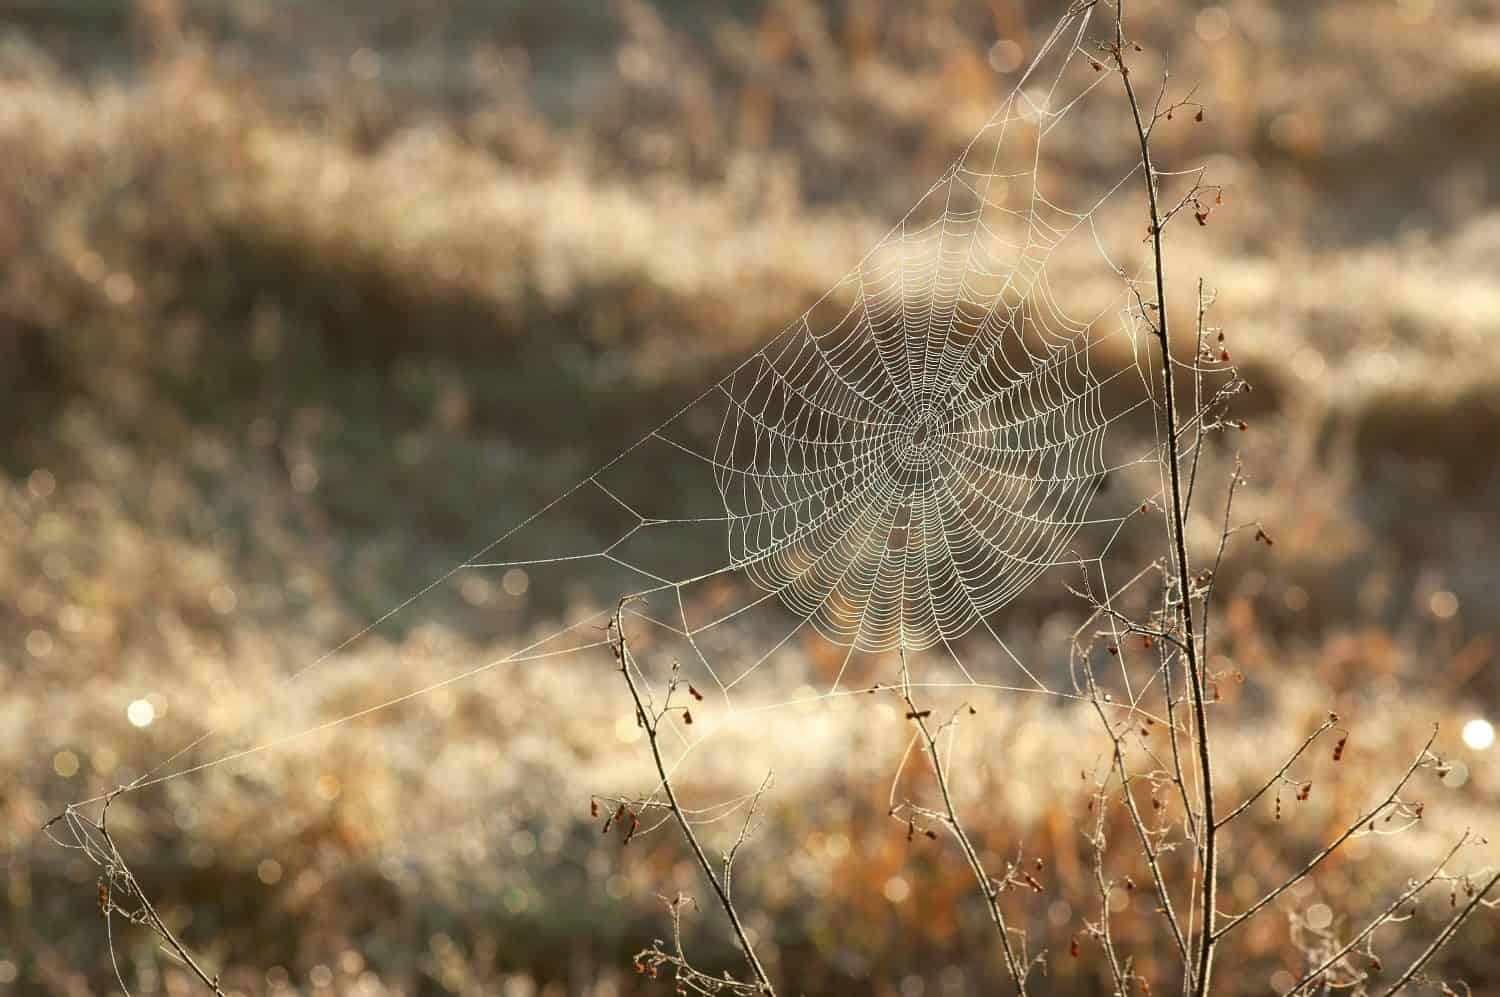 An orb spider web between two dried stems in a morning meadow. The web is anchored in a triangle frame and in sharp focus against a warm bokeh background. Interesting textures and highlights. 